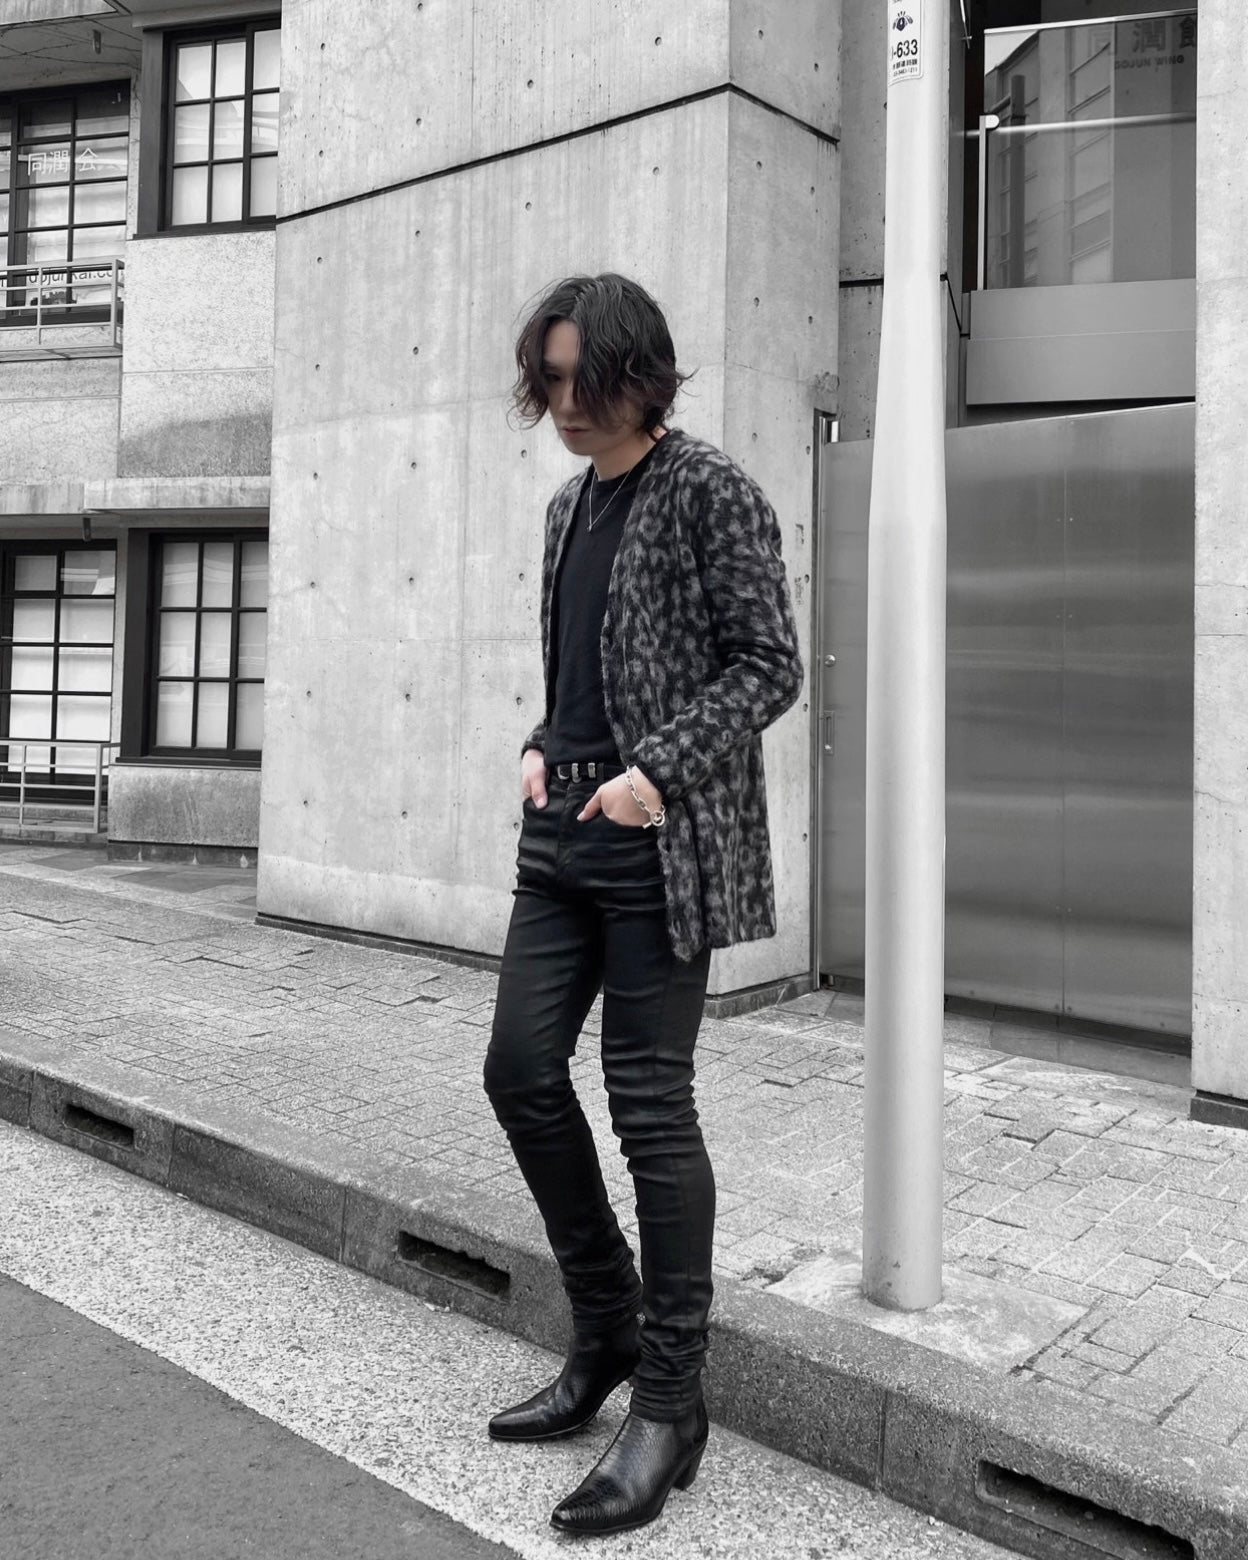 [Instant delivery] “Leopard mohair cardigan” (Black)